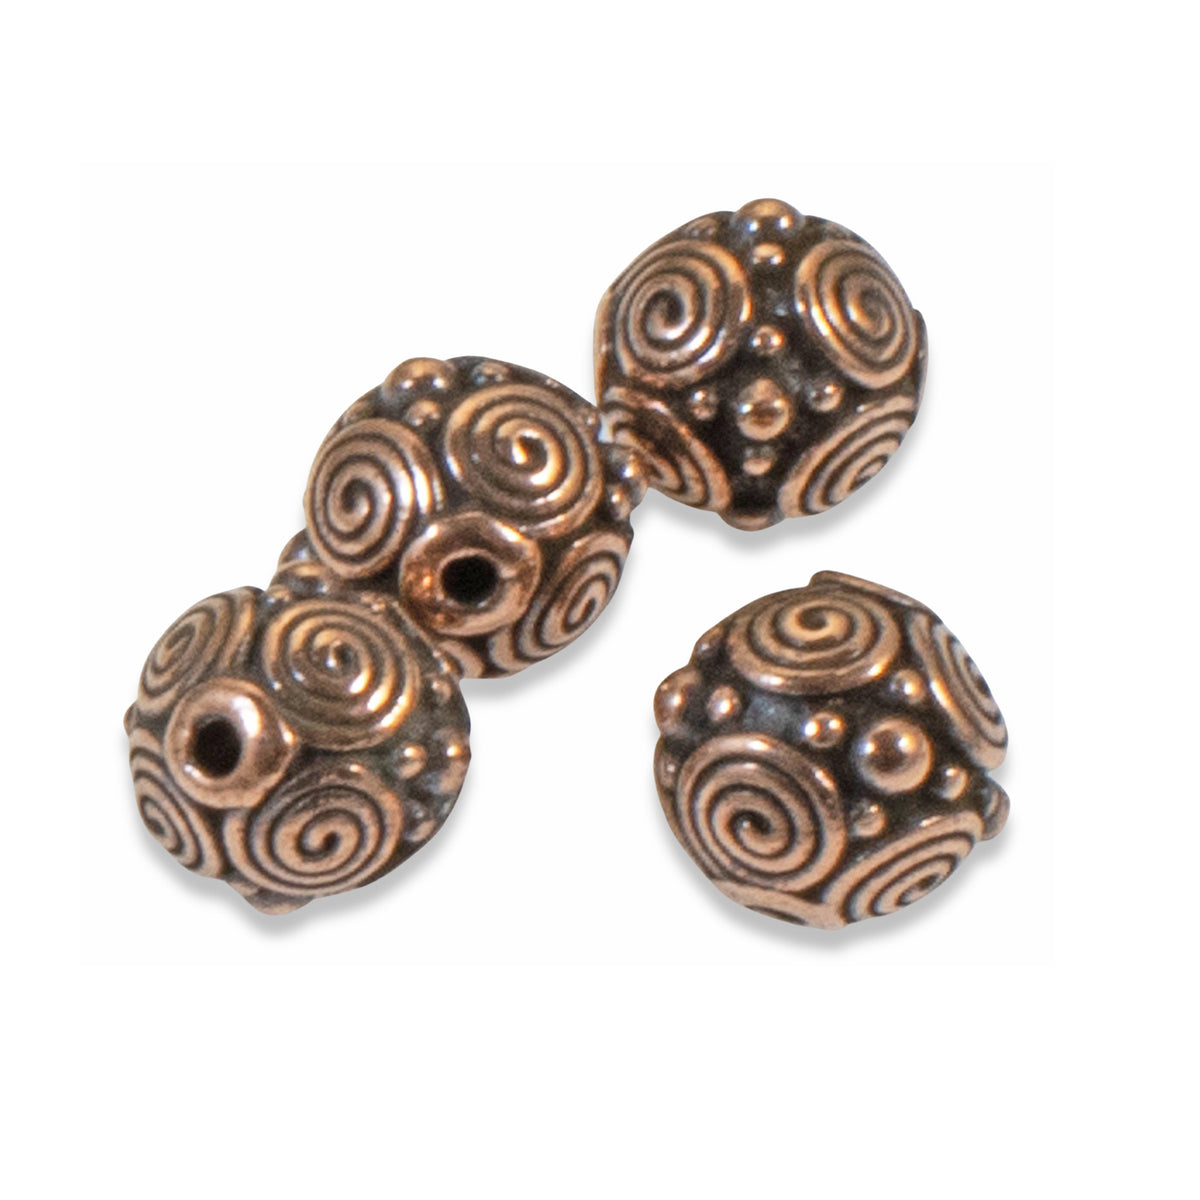 Solid Copper Beads // 2mm-4mm — Abbey Road Collection